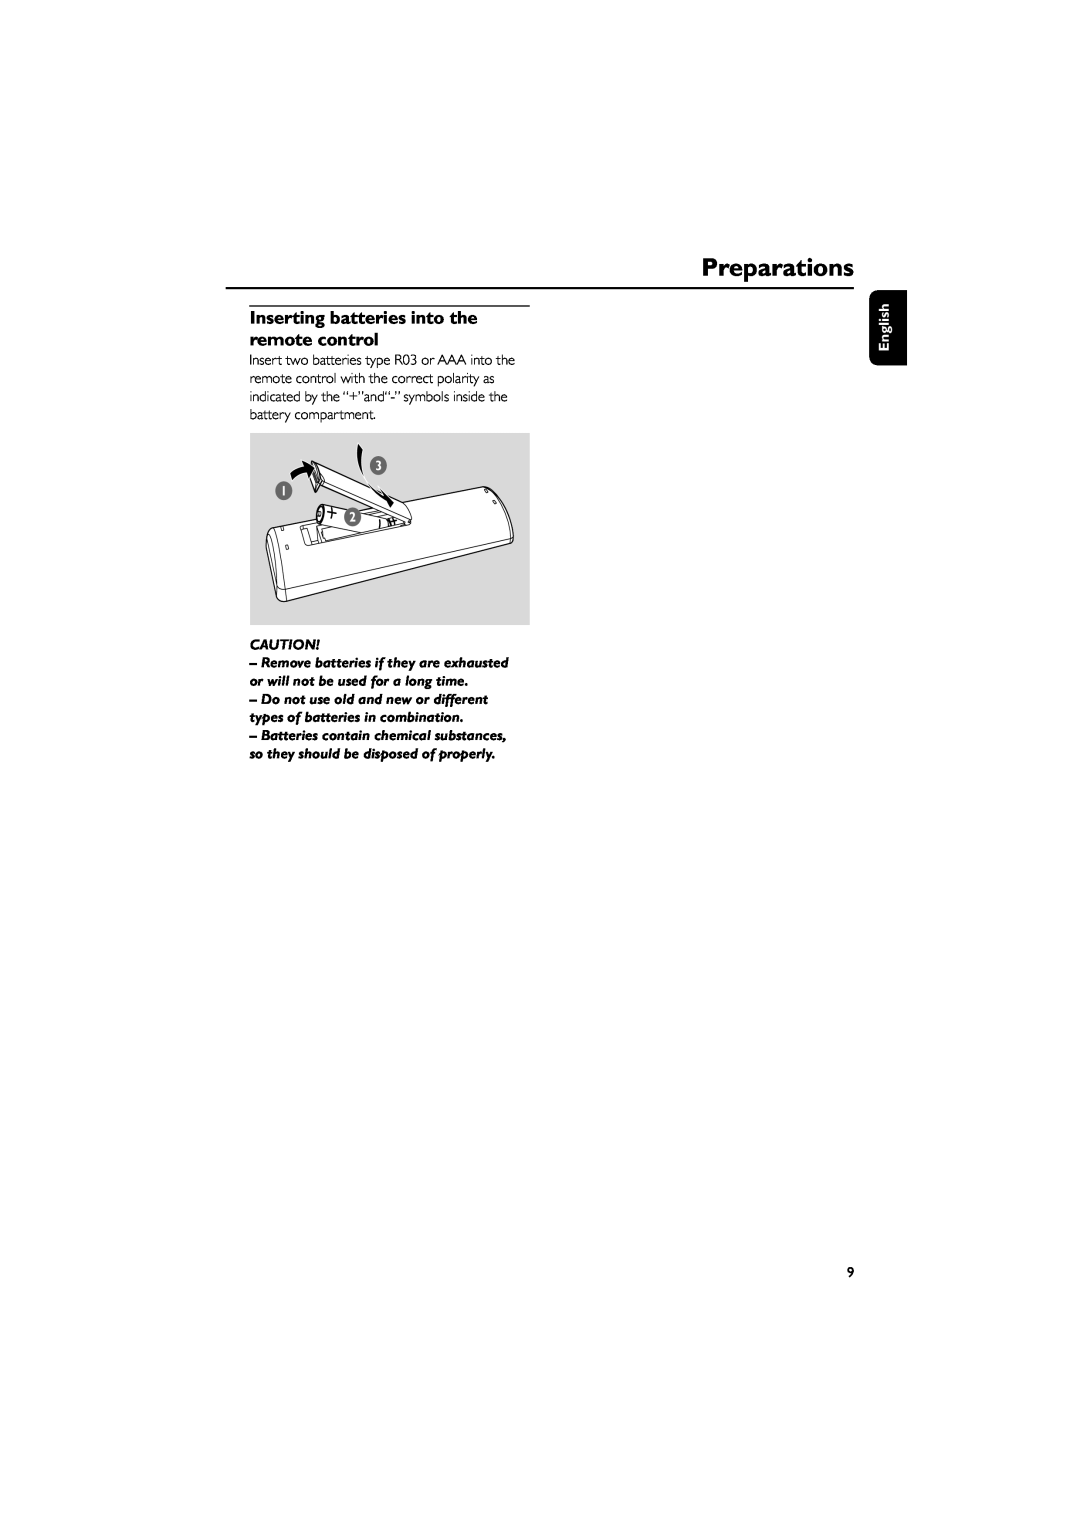 Philips FWM206 user manual Preparations, Inserting batteries into the remote control, English 